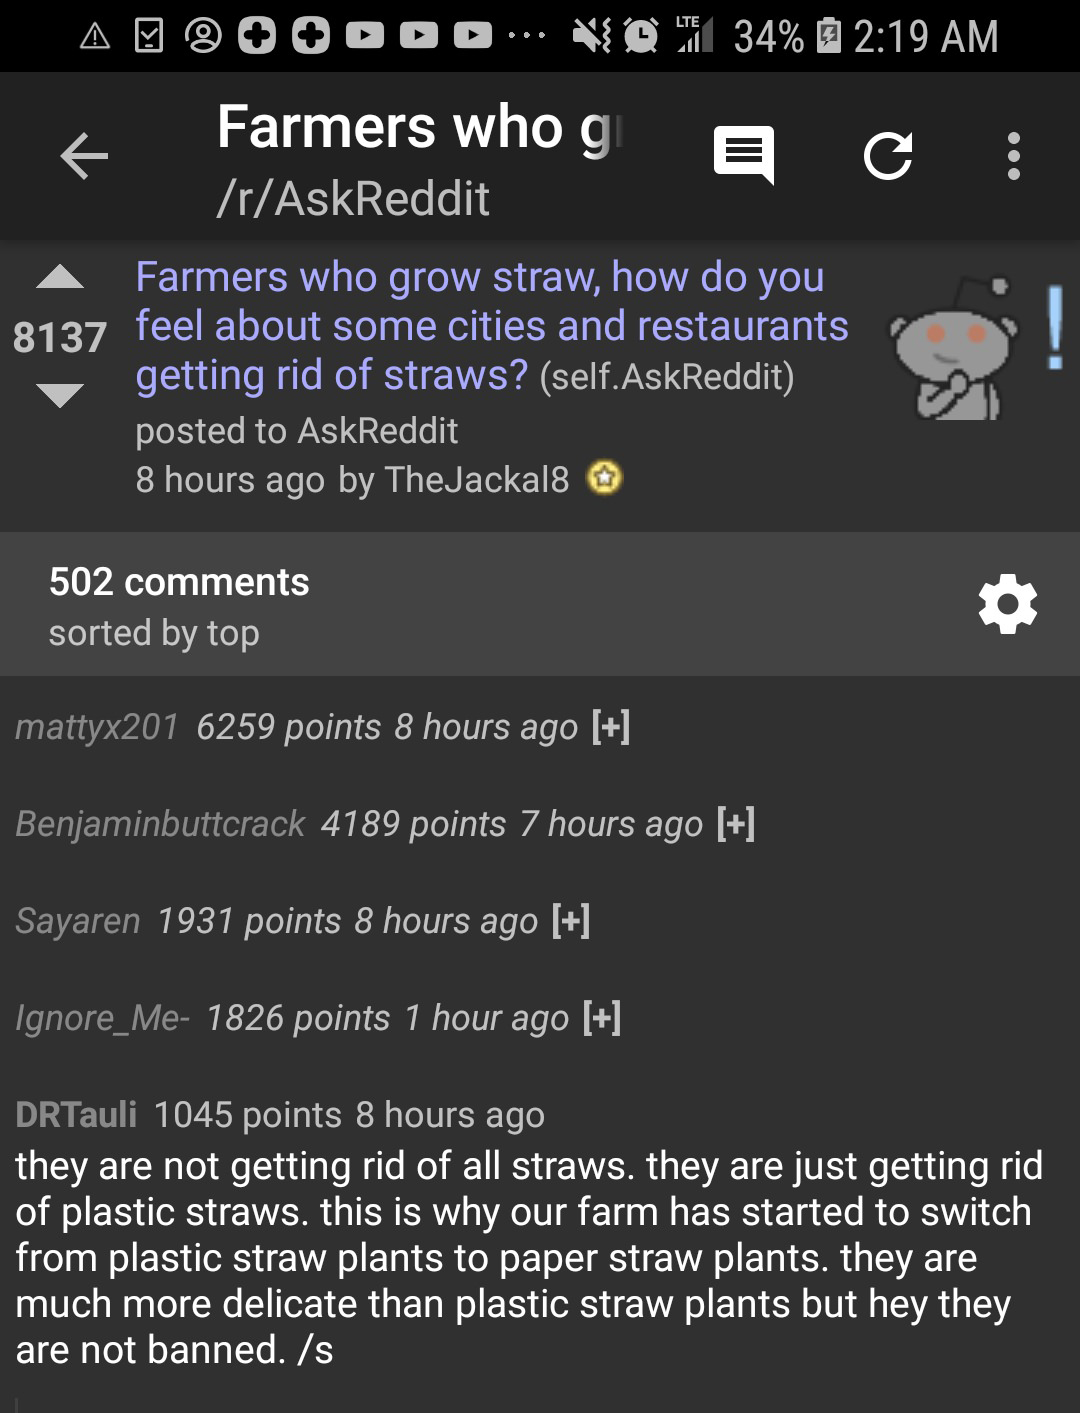 screenshot - A 90DDD... 7 34% Farmers who gec rAskReddit Farmers who grow straw, how do you 8137 feel about some cities and restaurants getting rid of straws? self.AskReddit posted to AskReddit 8 hours ago by The Jackals 502 sorted by top mattyx201 6259 p